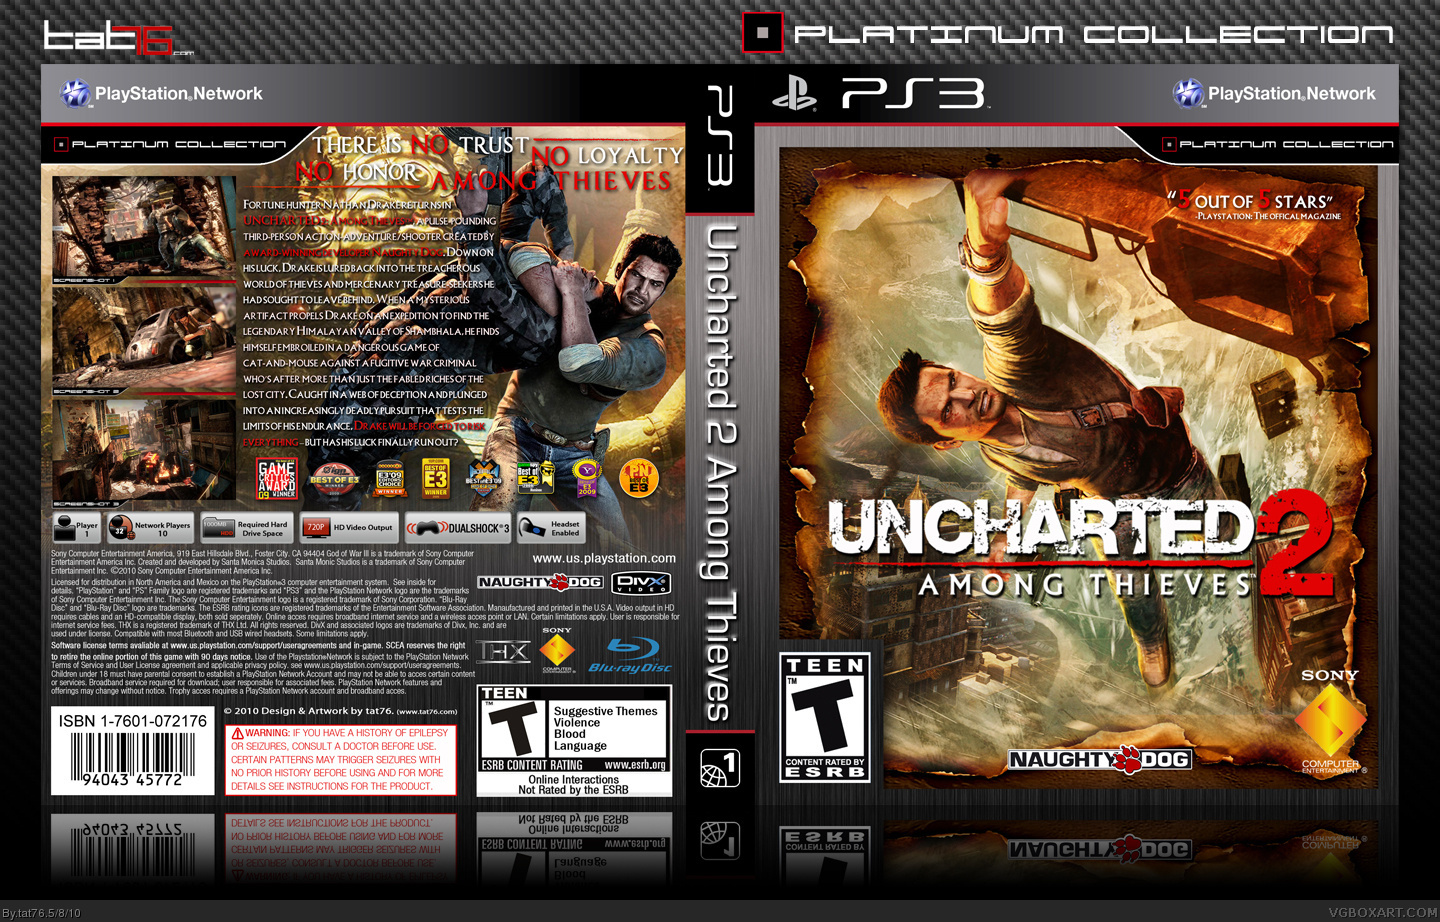 Uncharted 2: Among Thieves box cover